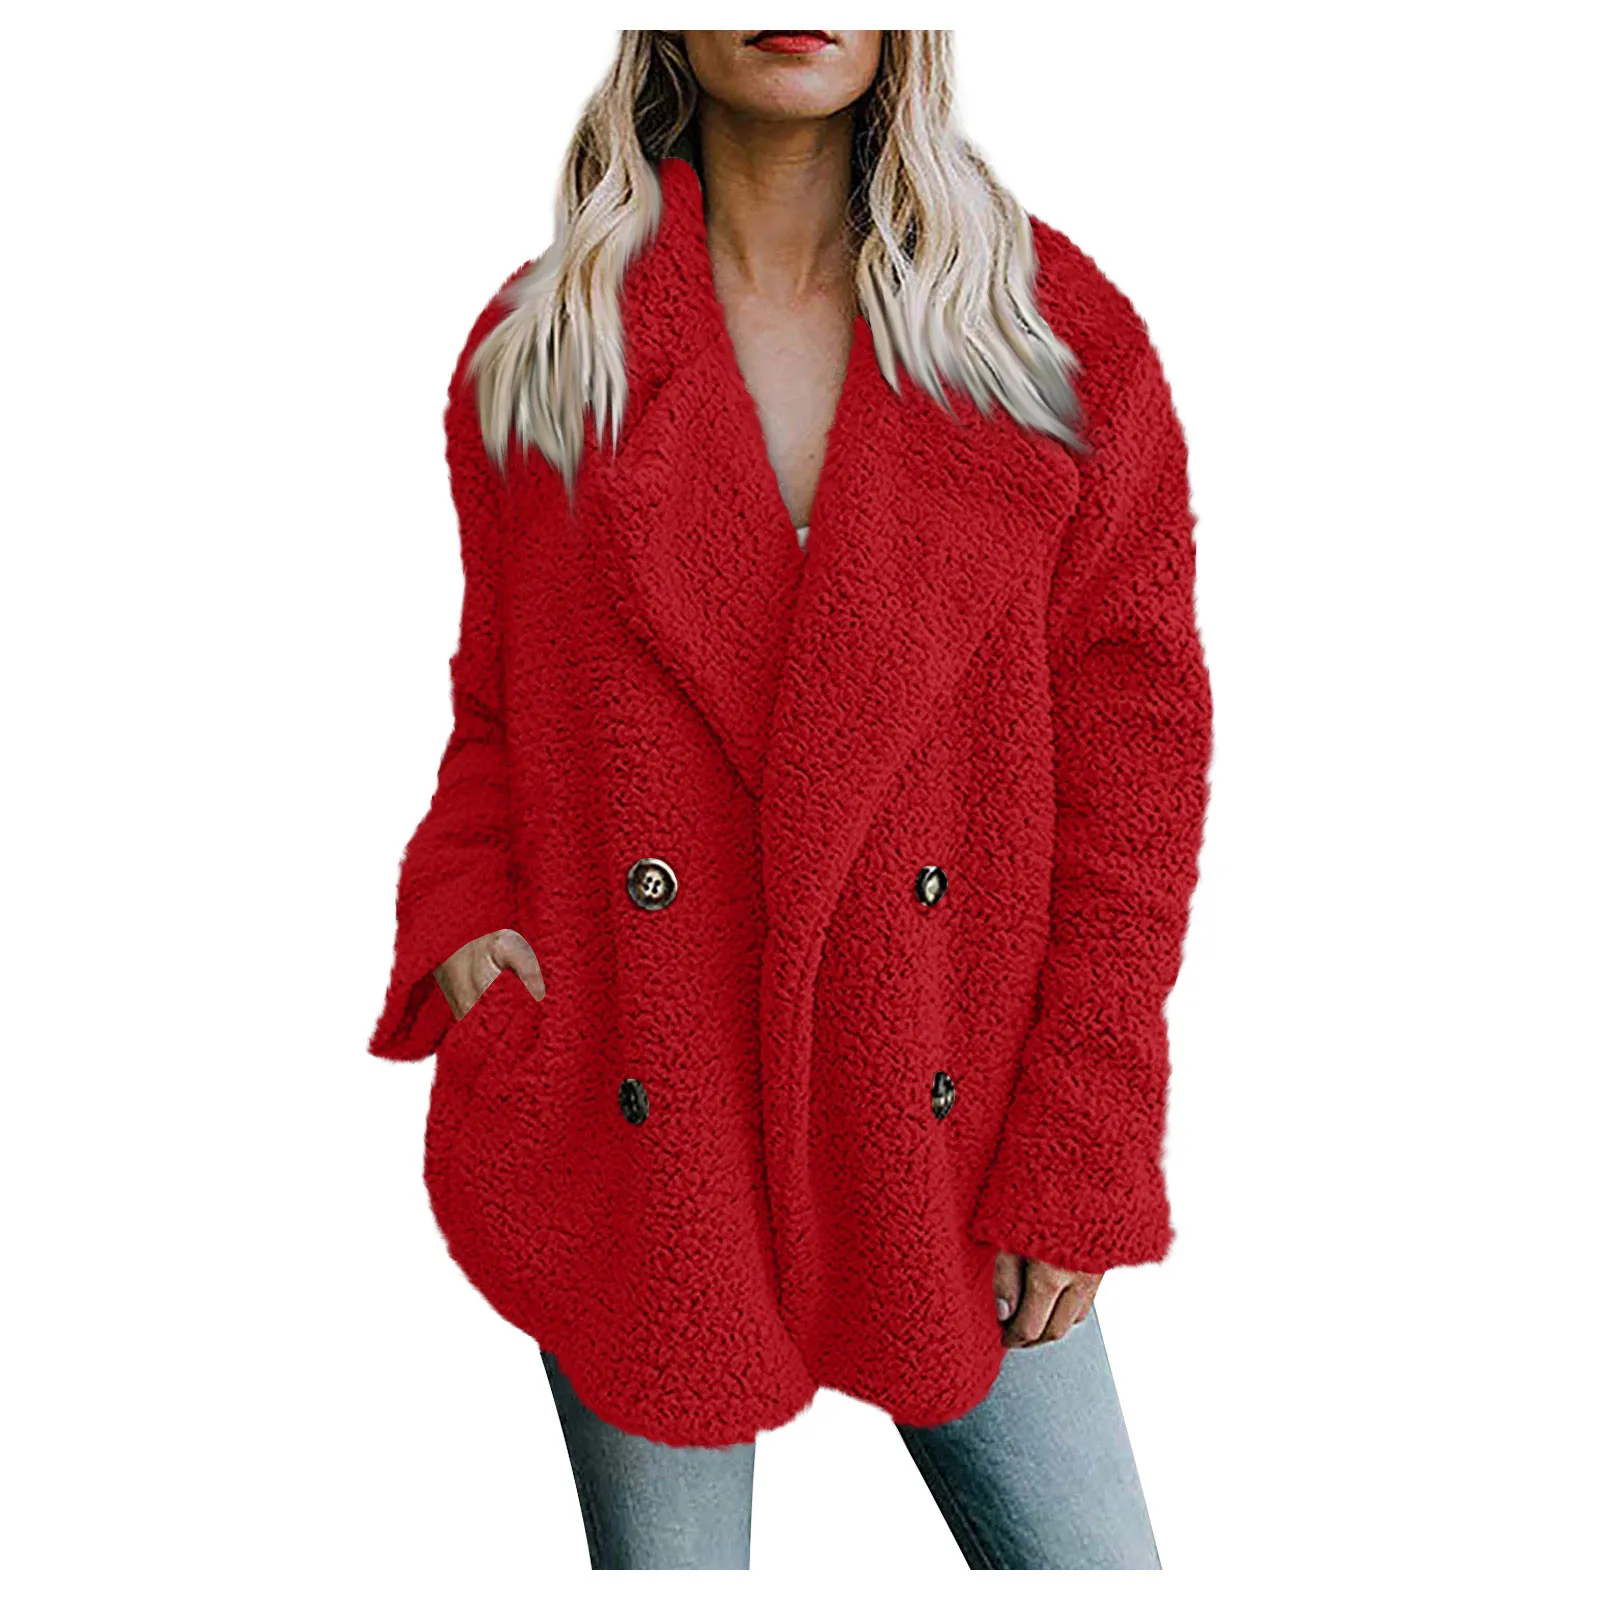 

Winter Thick Warm Teddy Coat Woman Lapel Long Sleeve Fluffy Hairy Fake Fur Jackets Female Button Pockets Plus Size Overcoat